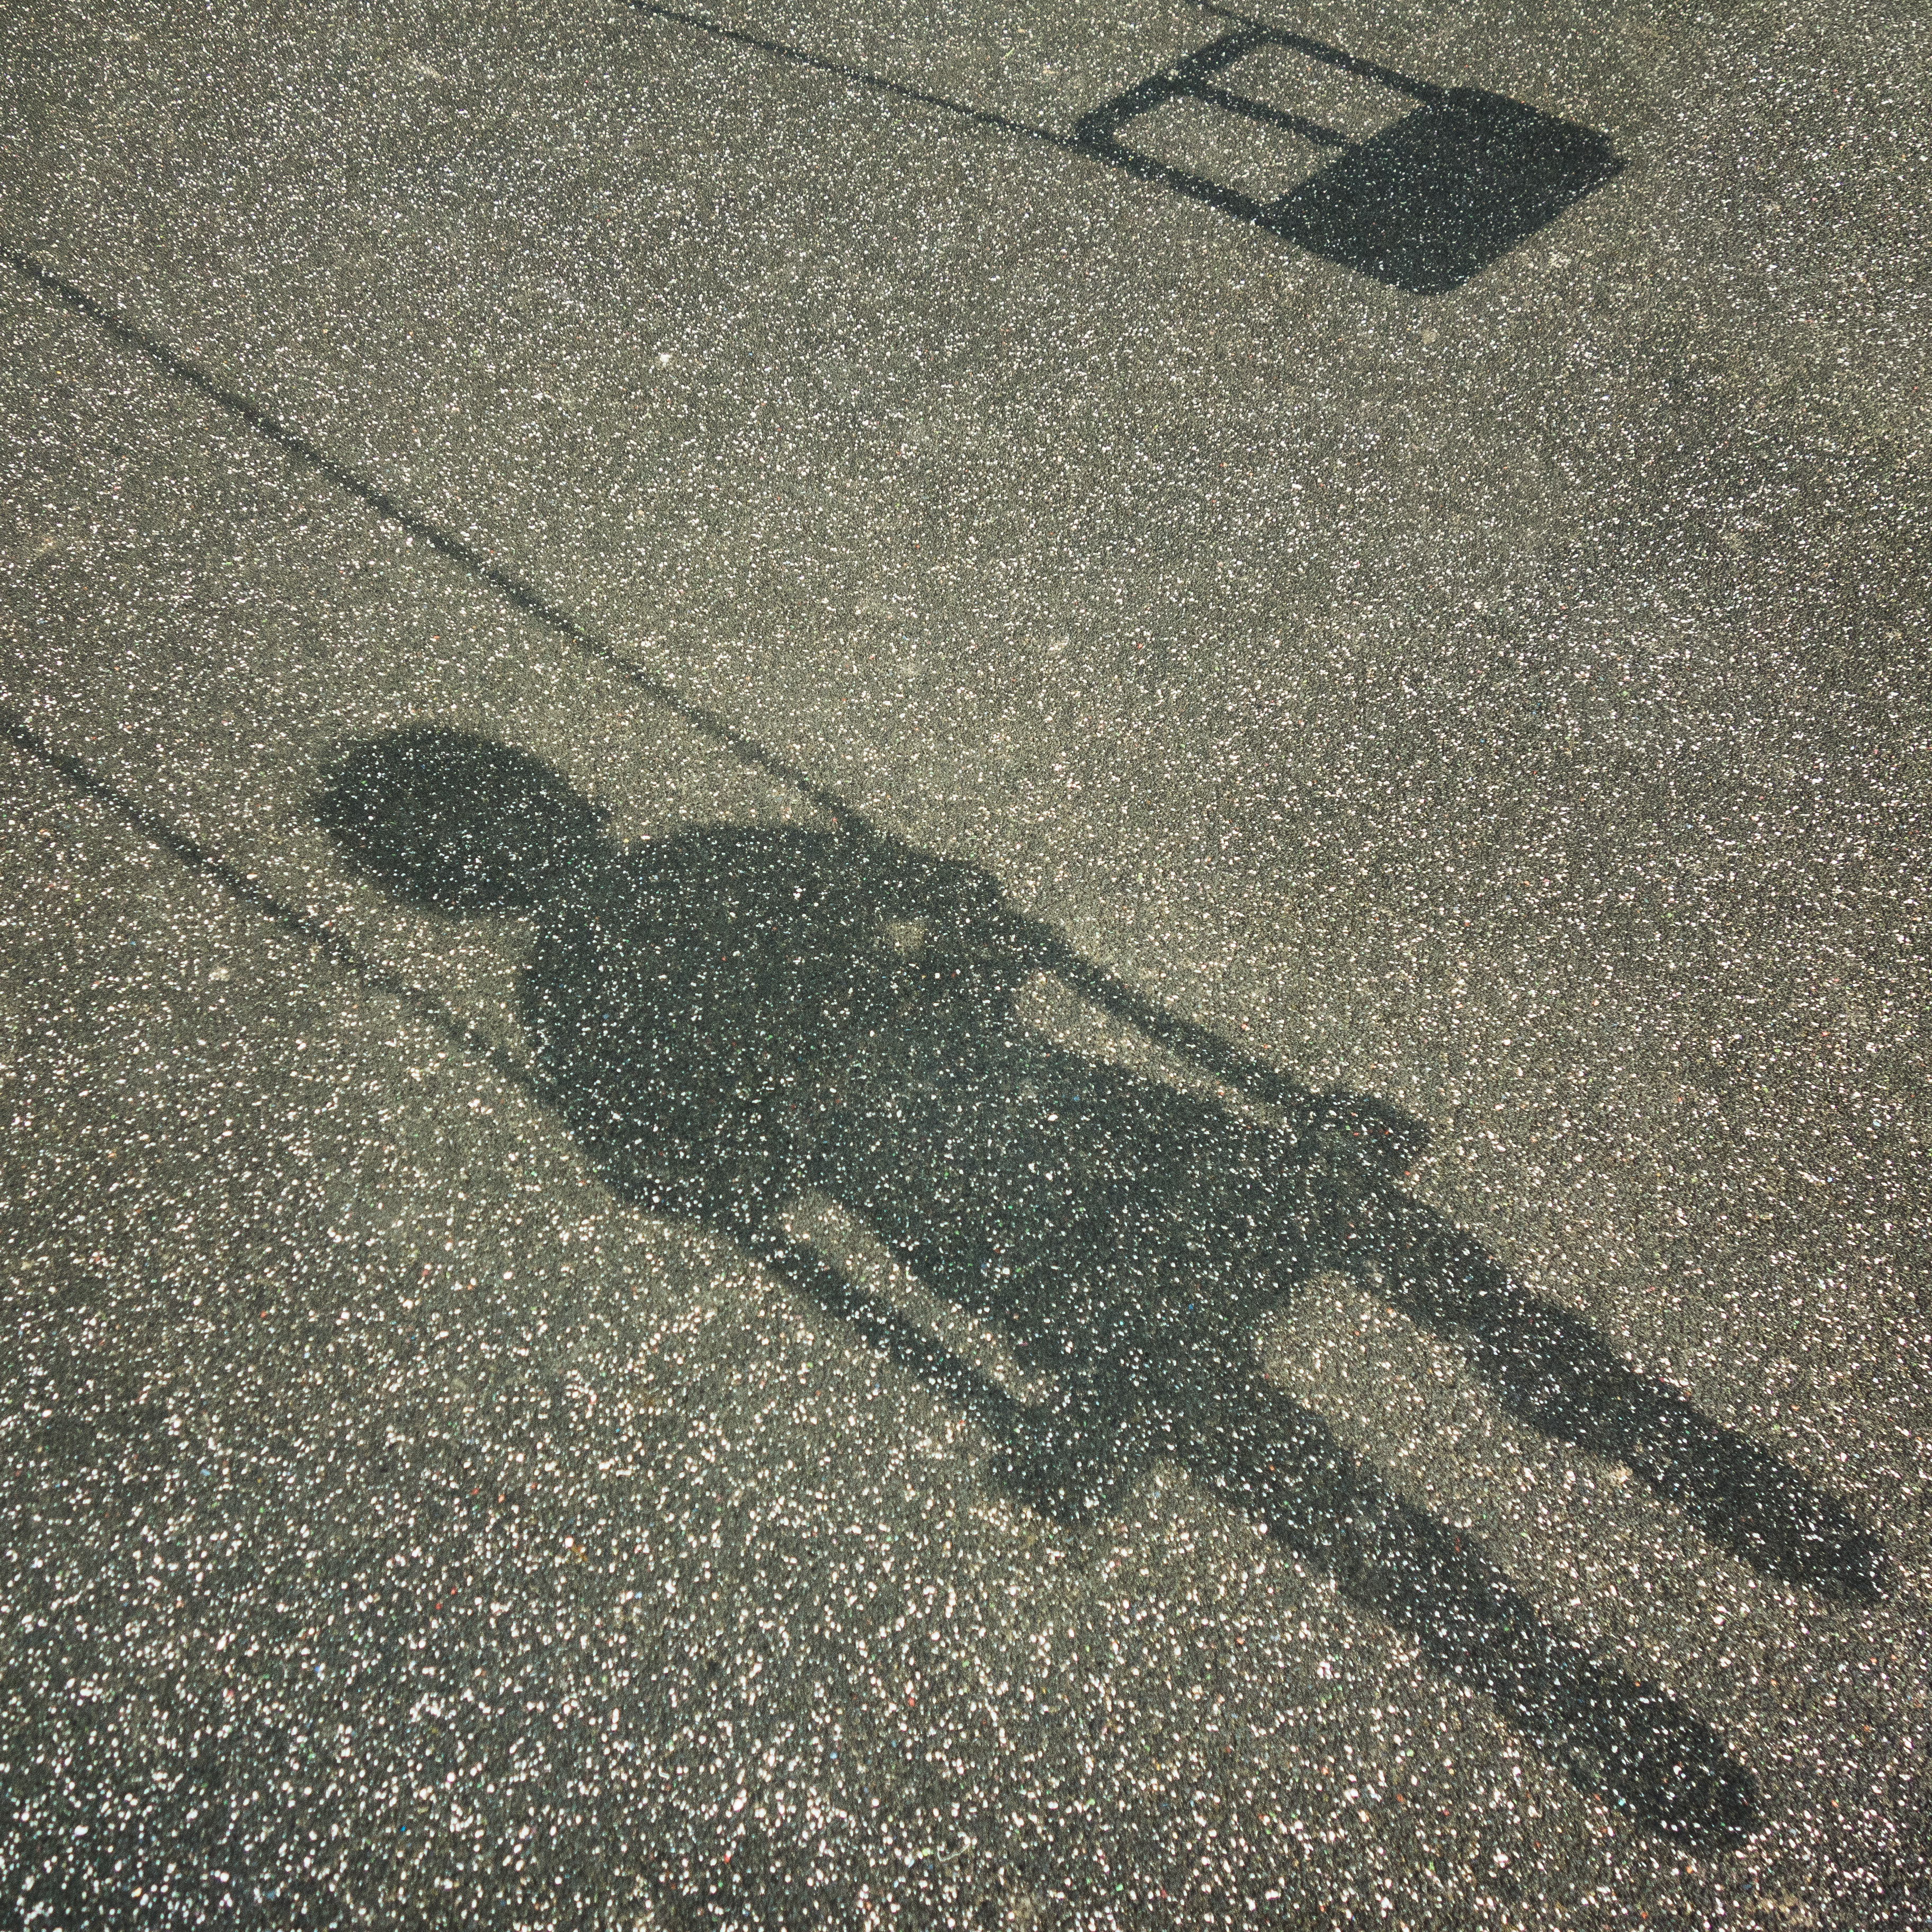 Shadow of child sitting in swing